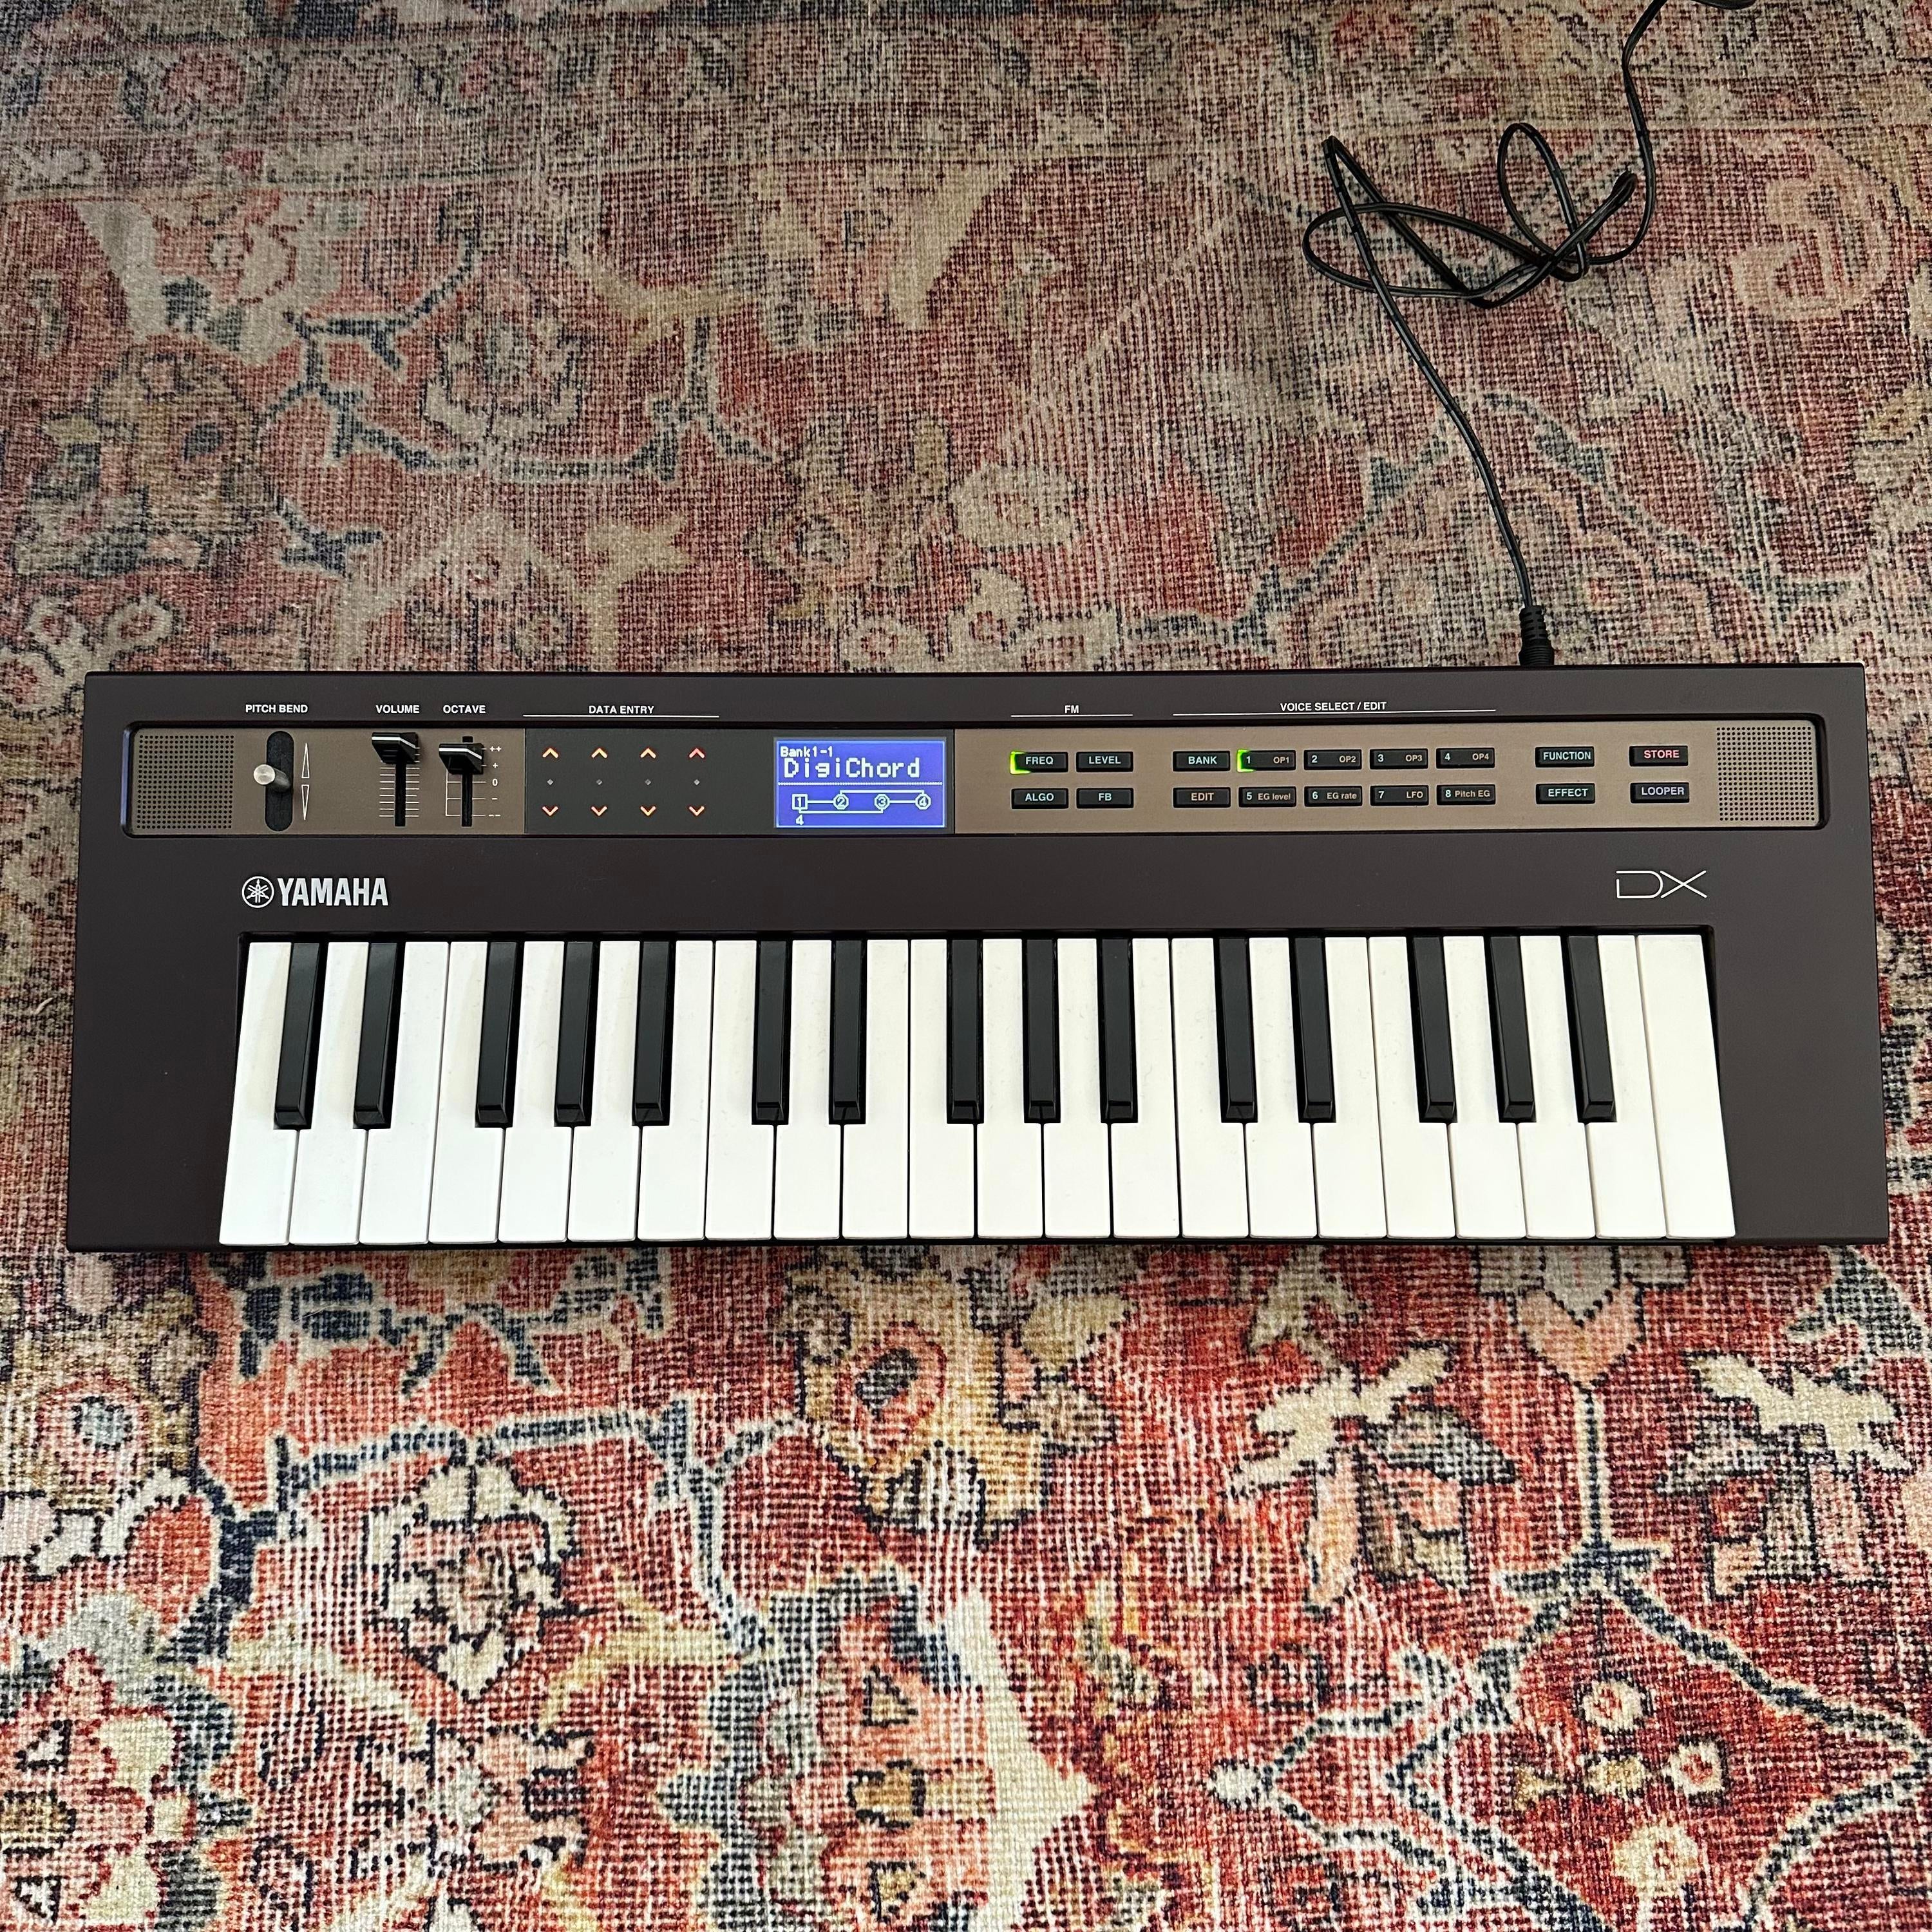 Used Yamaha Reface DX FM Synthesizer - Sweetwater's Gear Exchange